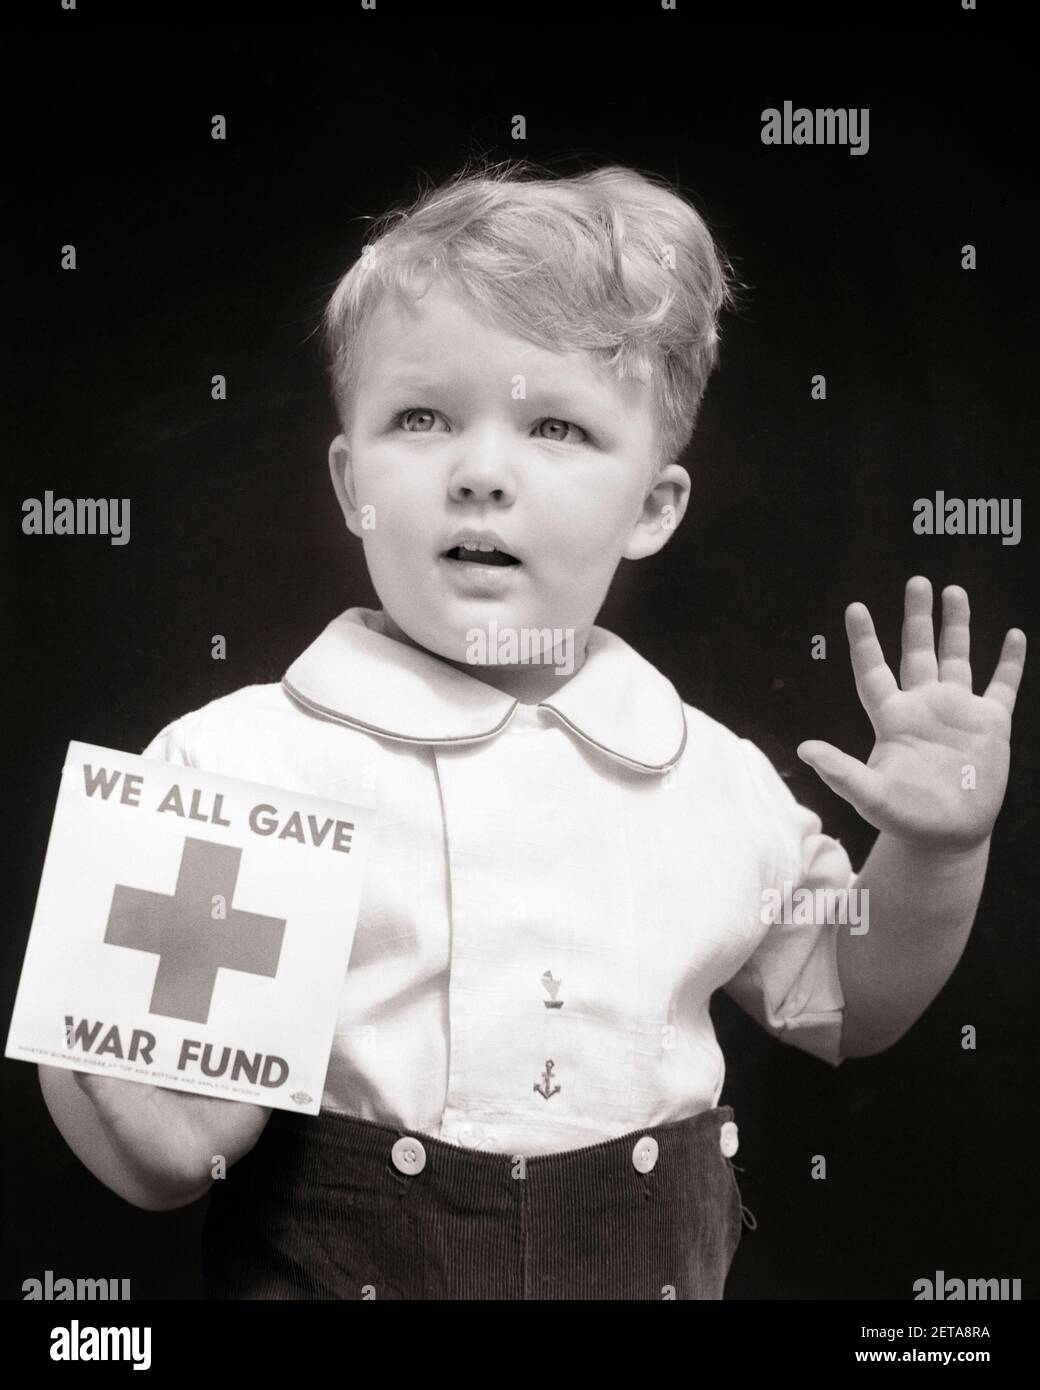 1940s TODDLER BOY IN WINDOW WITH WE ALL GAVE WORLD WAR 2 FUND RED CROSS DECAL  - d1641 HAR001 HARS STUDIO SHOT HOME LIFE COPY SPACE HALF-LENGTH INSPIRATION CARING MALES B&W BOND FREEDOM EFFORT WORLD WARS WORLD WAR WORLD WAR TWO WORLD WAR II APPEAL FUND RED CROSS WORLD WAR 2 BABY BOY DONATIONS COOPERATION FUND RAISING GROWTH JUVENILES BLACK AND WHITE CAUCASIAN ETHNICITY FIRST AID HAR001 OLD FASHIONED Stock Photo